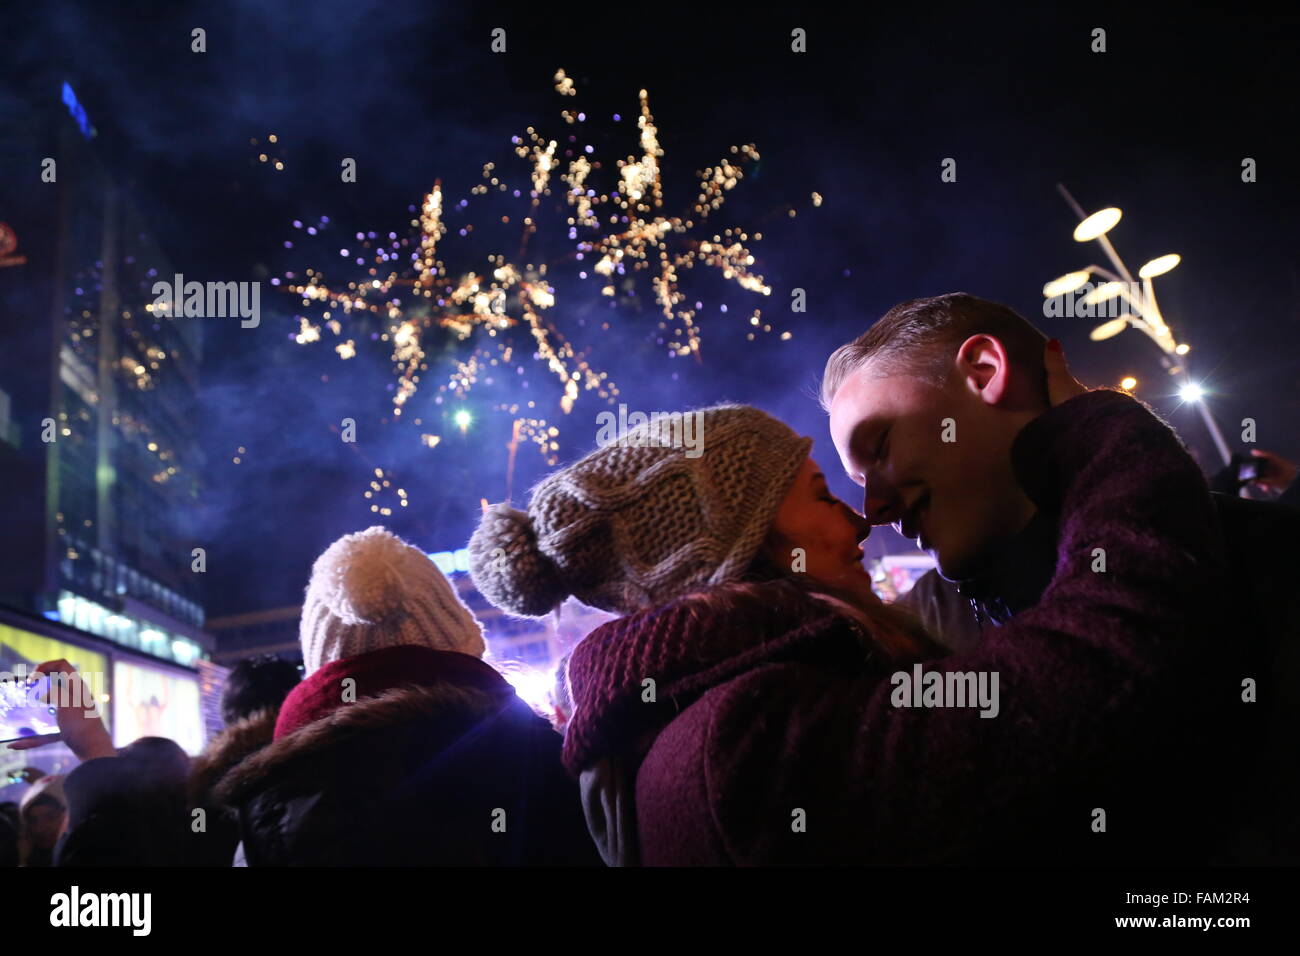 Sarajevo, Bosnia-Herzegovina. 31st Dec, 2015. People attend a concert to celebrate the New Year at the BBI Square in central Sarajevo, Bosnia-Herzegovina, Dec. 31, 2015. Sarajevo residents and tourists traditionally welcome the New Year on the streets of the city. Credit:  Haris Memija/Xinhua/Alamy Live News Stock Photo